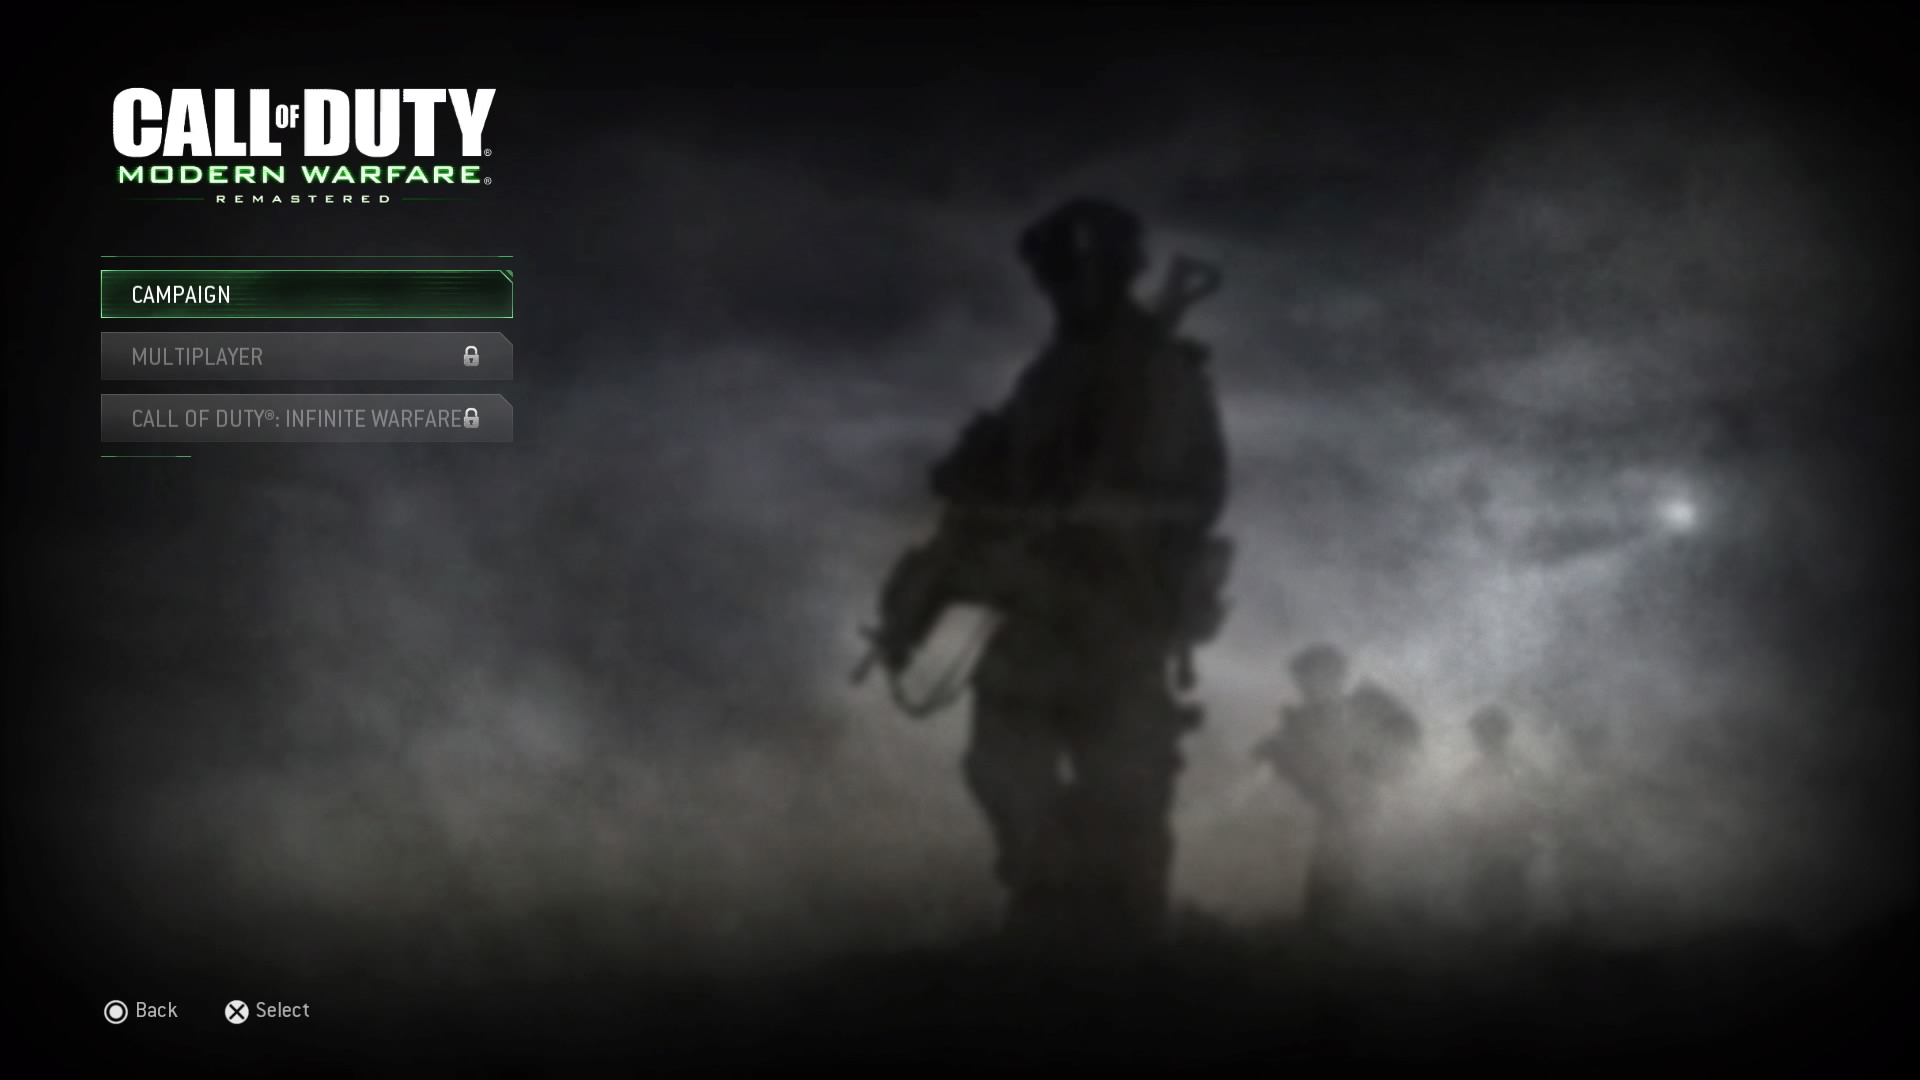 Call of Duty: Modern Warfare Remastered PS4 title campaign screen